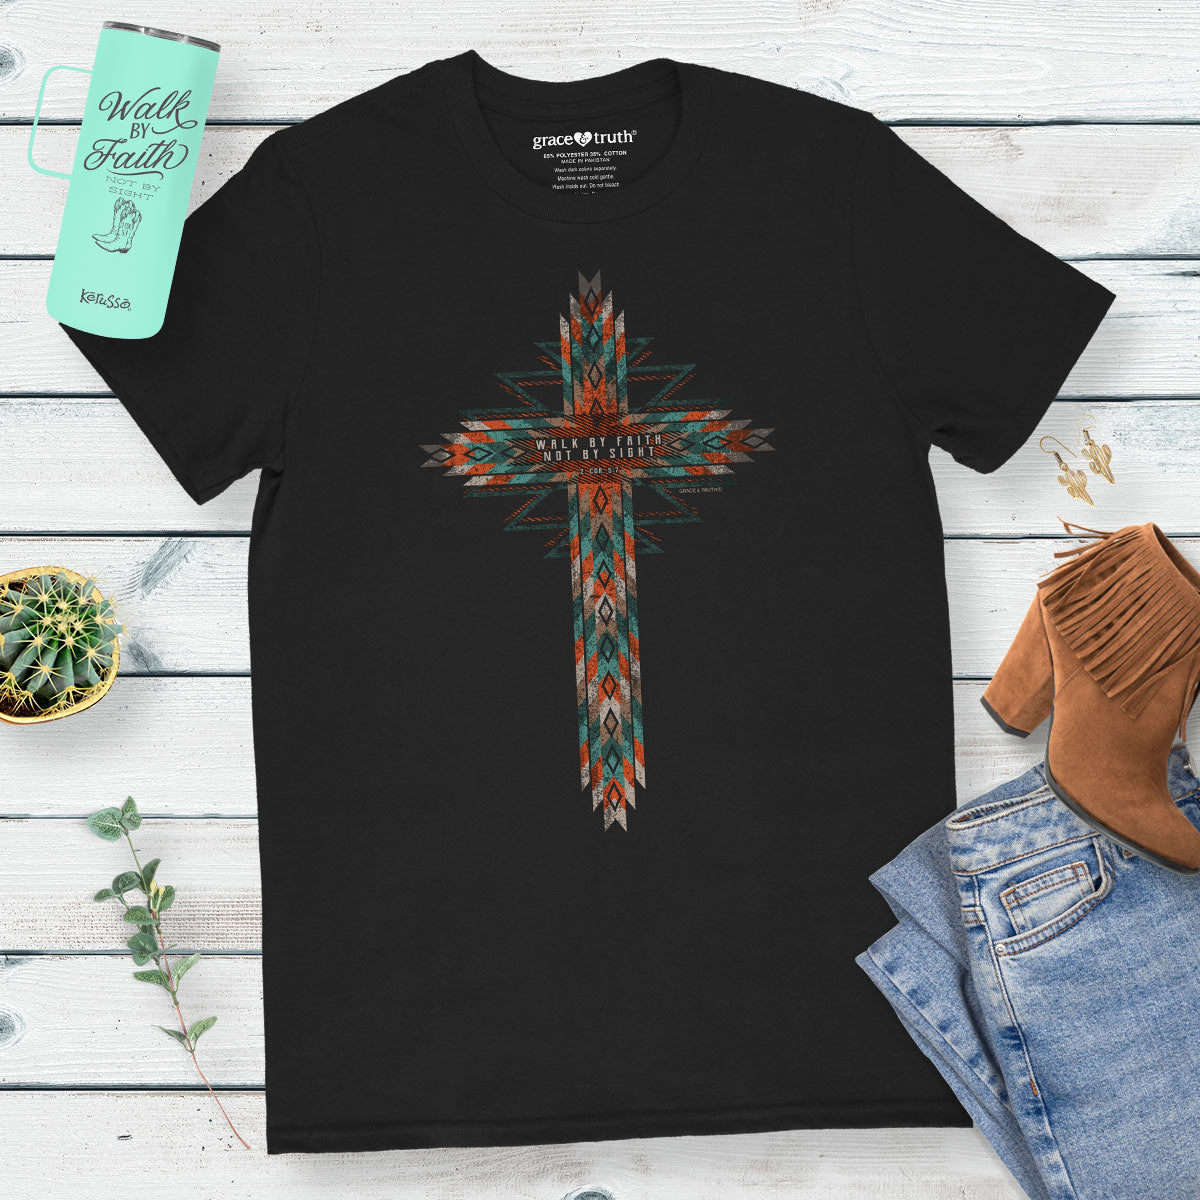 Divinely Inspired Christian Apparel Telling the Story of Jesus